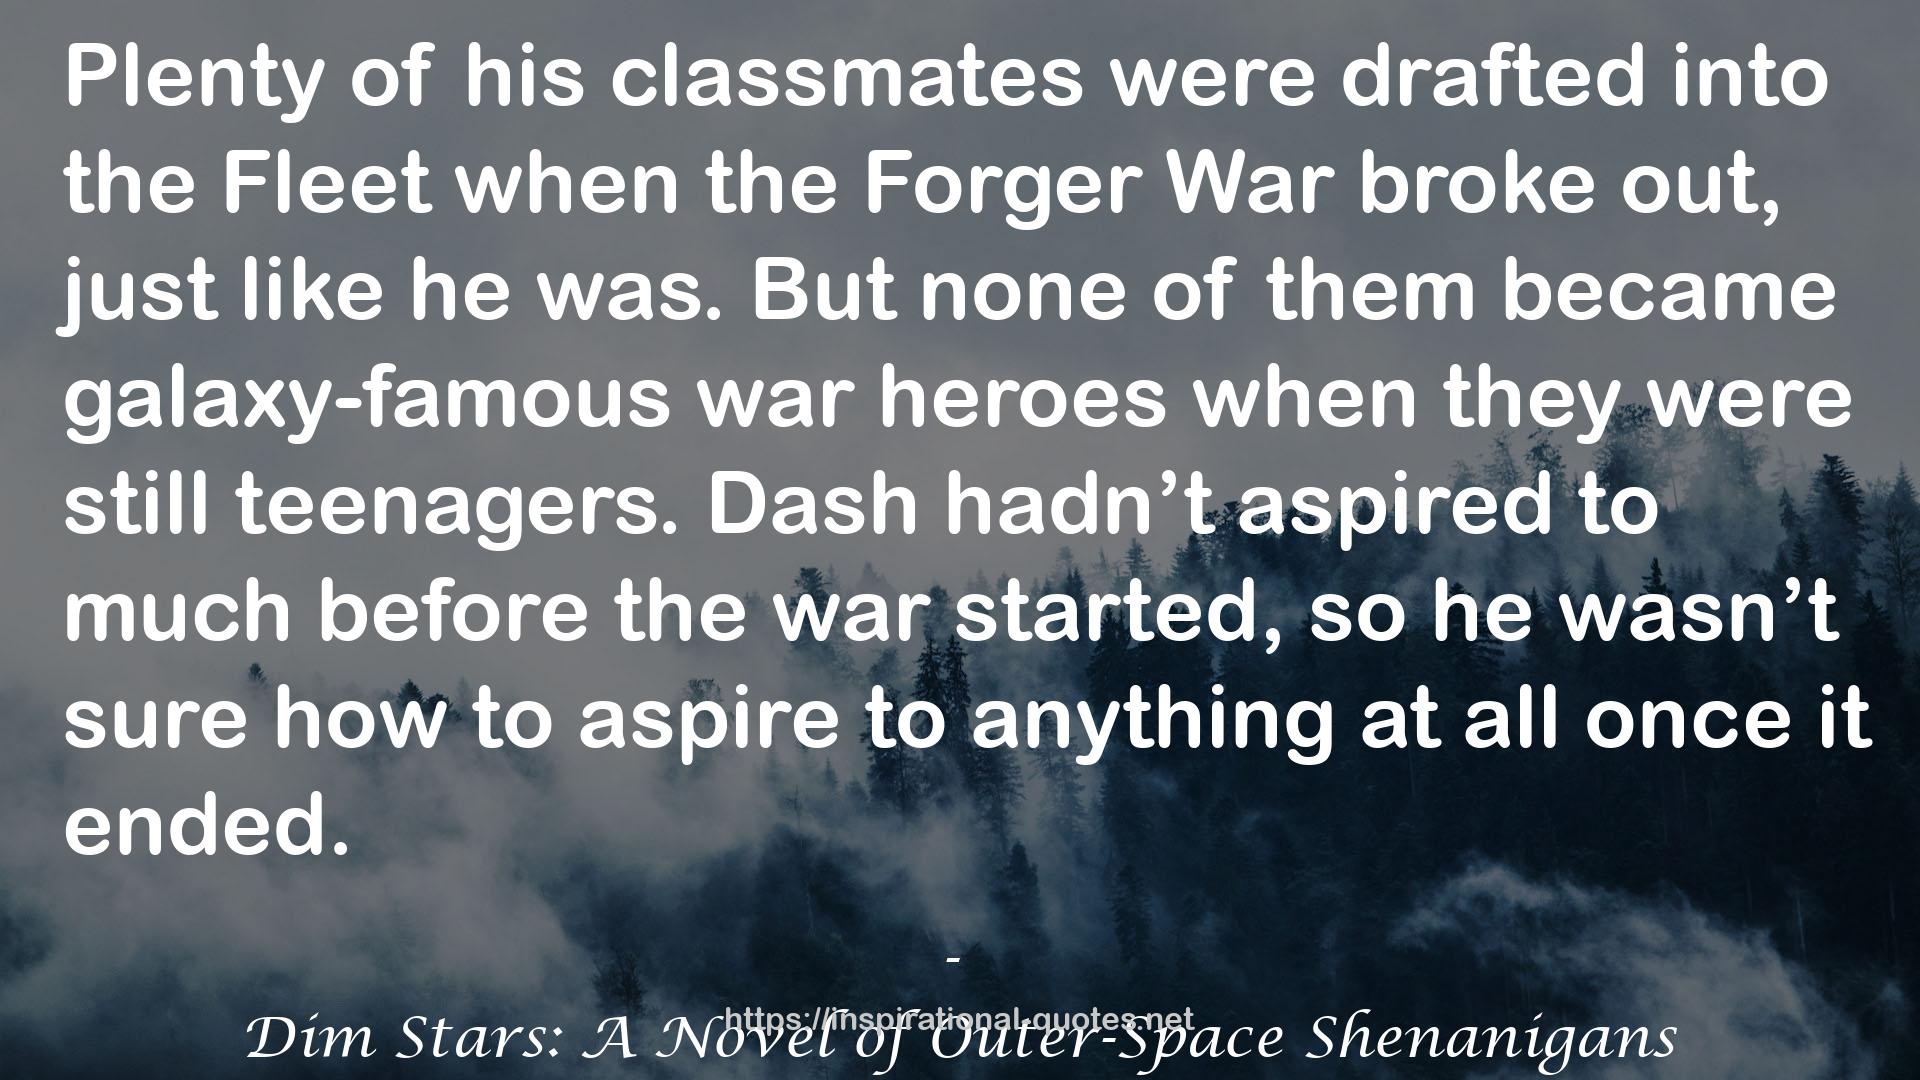 Dim Stars: A Novel of Outer-Space Shenanigans QUOTES